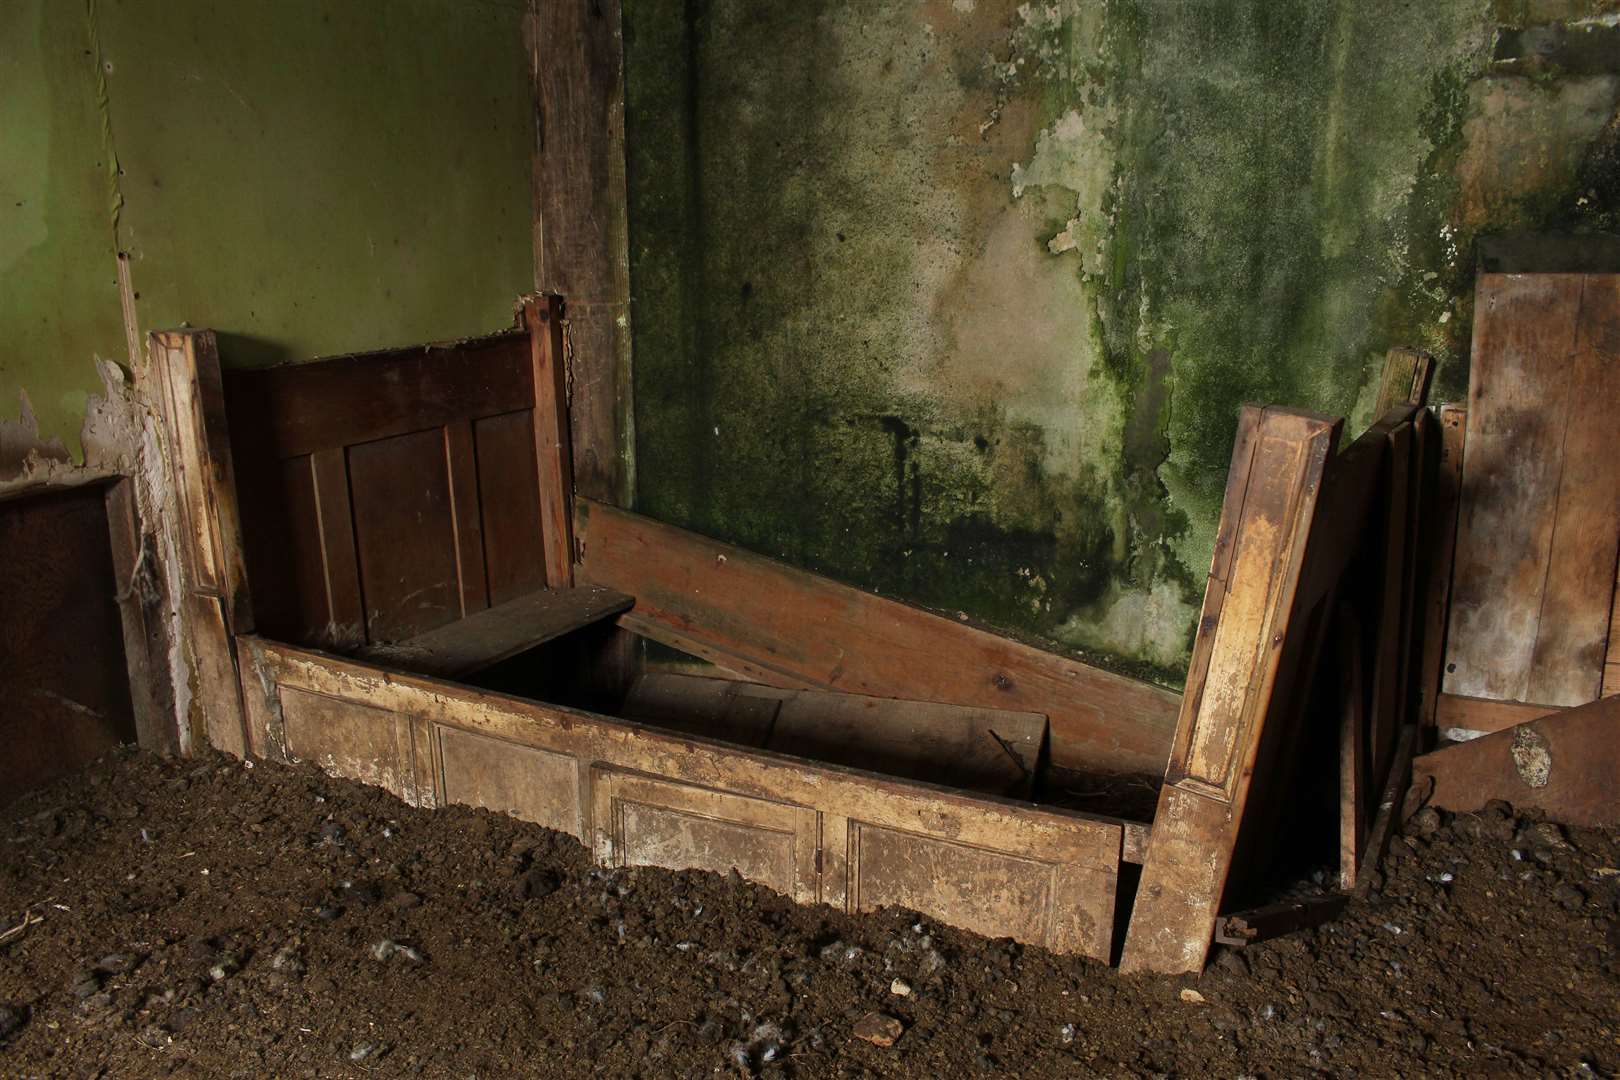 A Stroma box-bed, May 2019. Picture: Alan Hendry